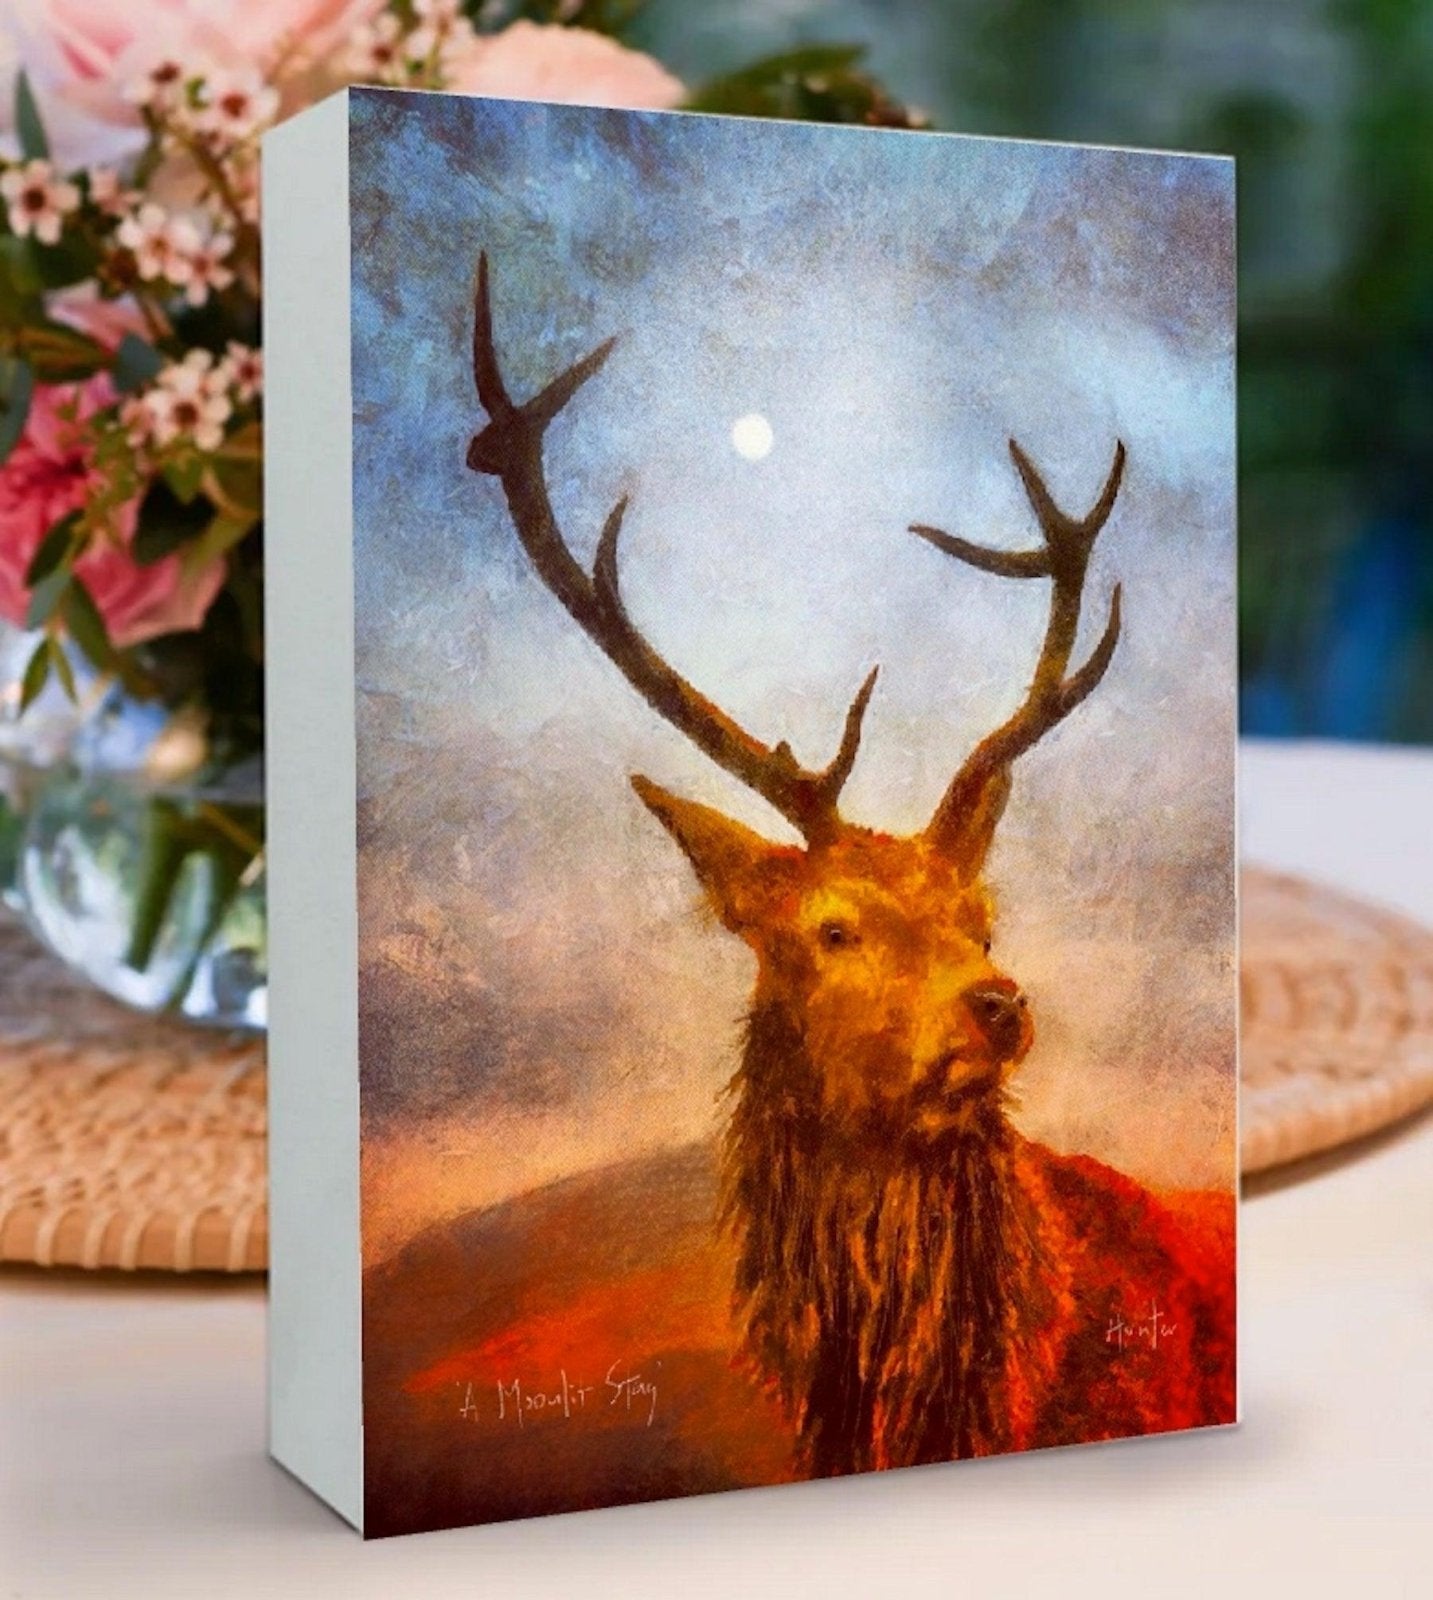 A Brooding Pap Of Glencoe Wooden Art Block-Wooden Art Blocks-Glencoe Art Gallery-Paintings, Prints, Homeware, Art Gifts From Scotland By Scottish Artist Kevin Hunter